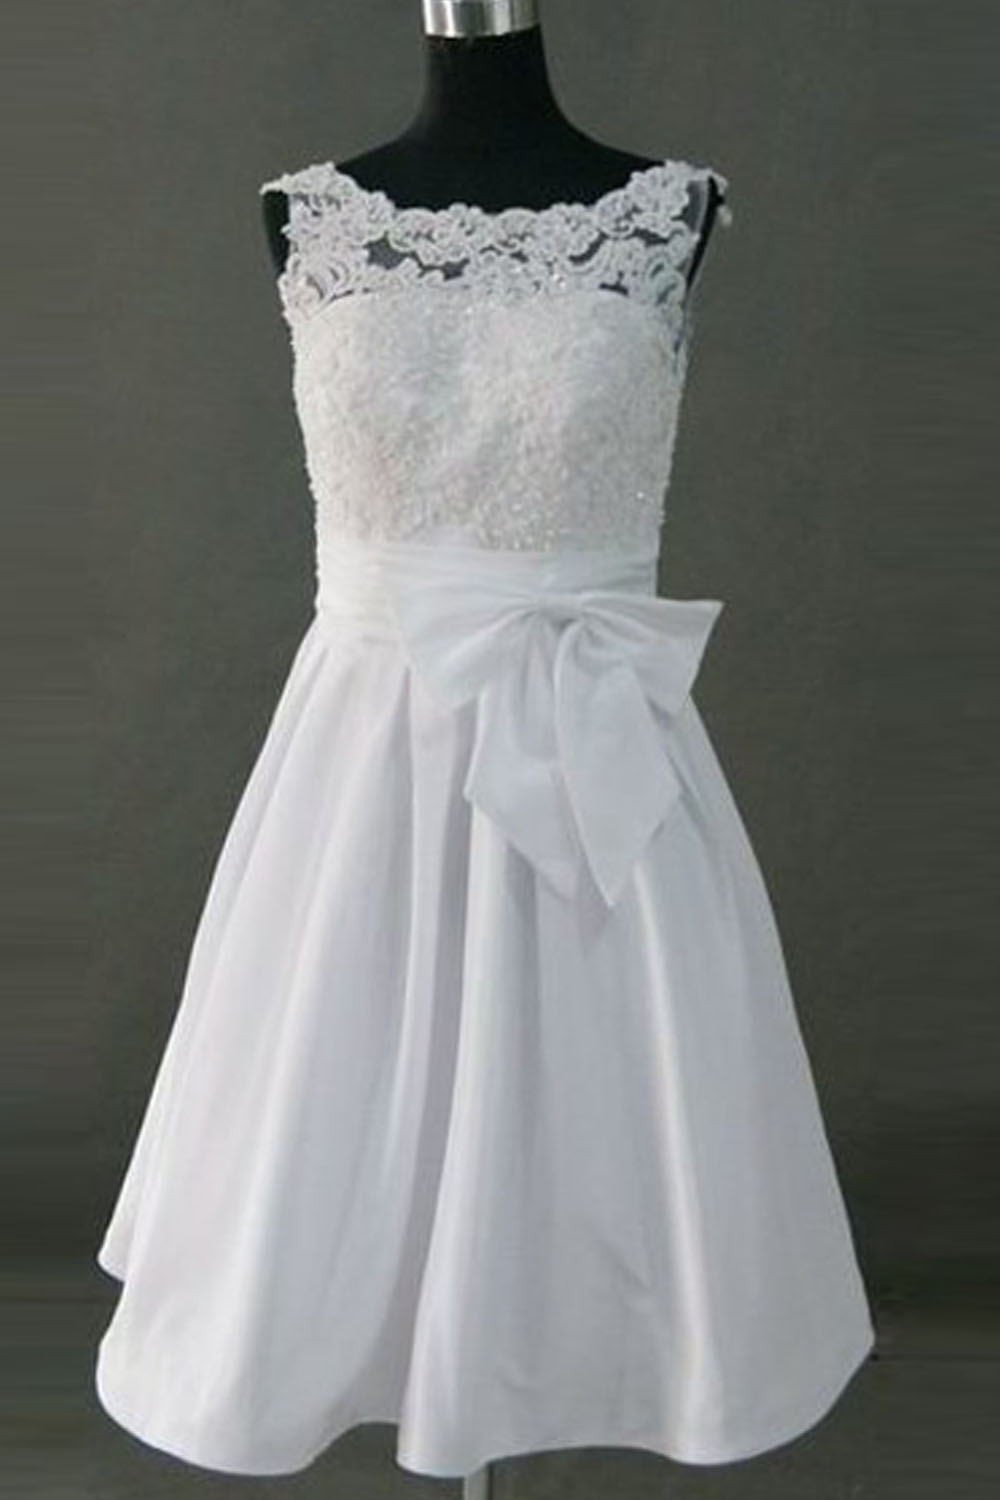 Pretty Simple Short Lace Wedding Dresses With Bow Belt W5 on Luulla